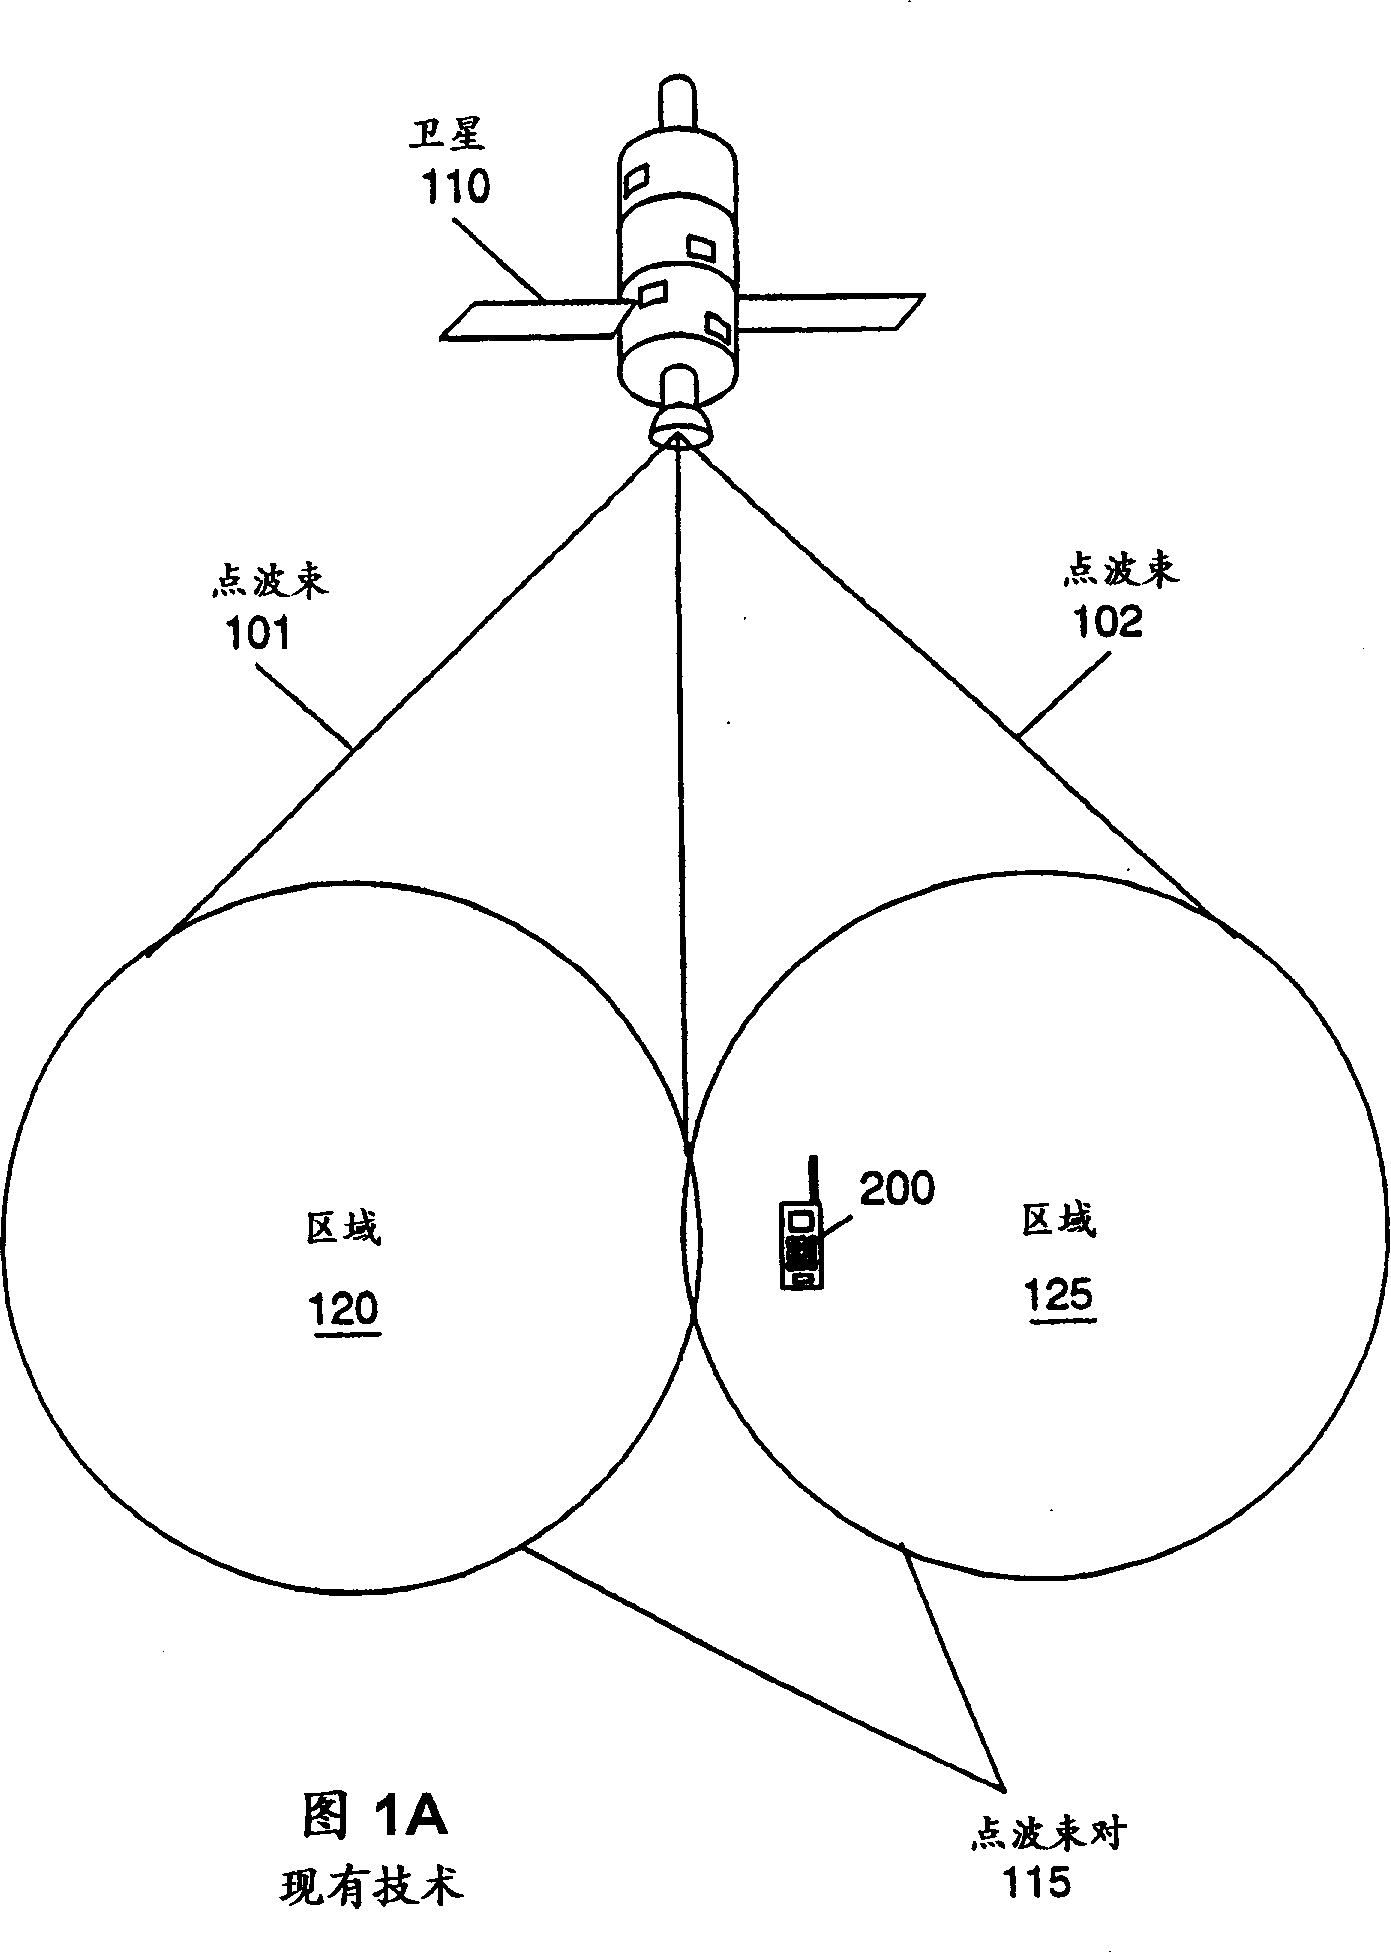 Method and device for reducing location update procedures in satellite communication systems